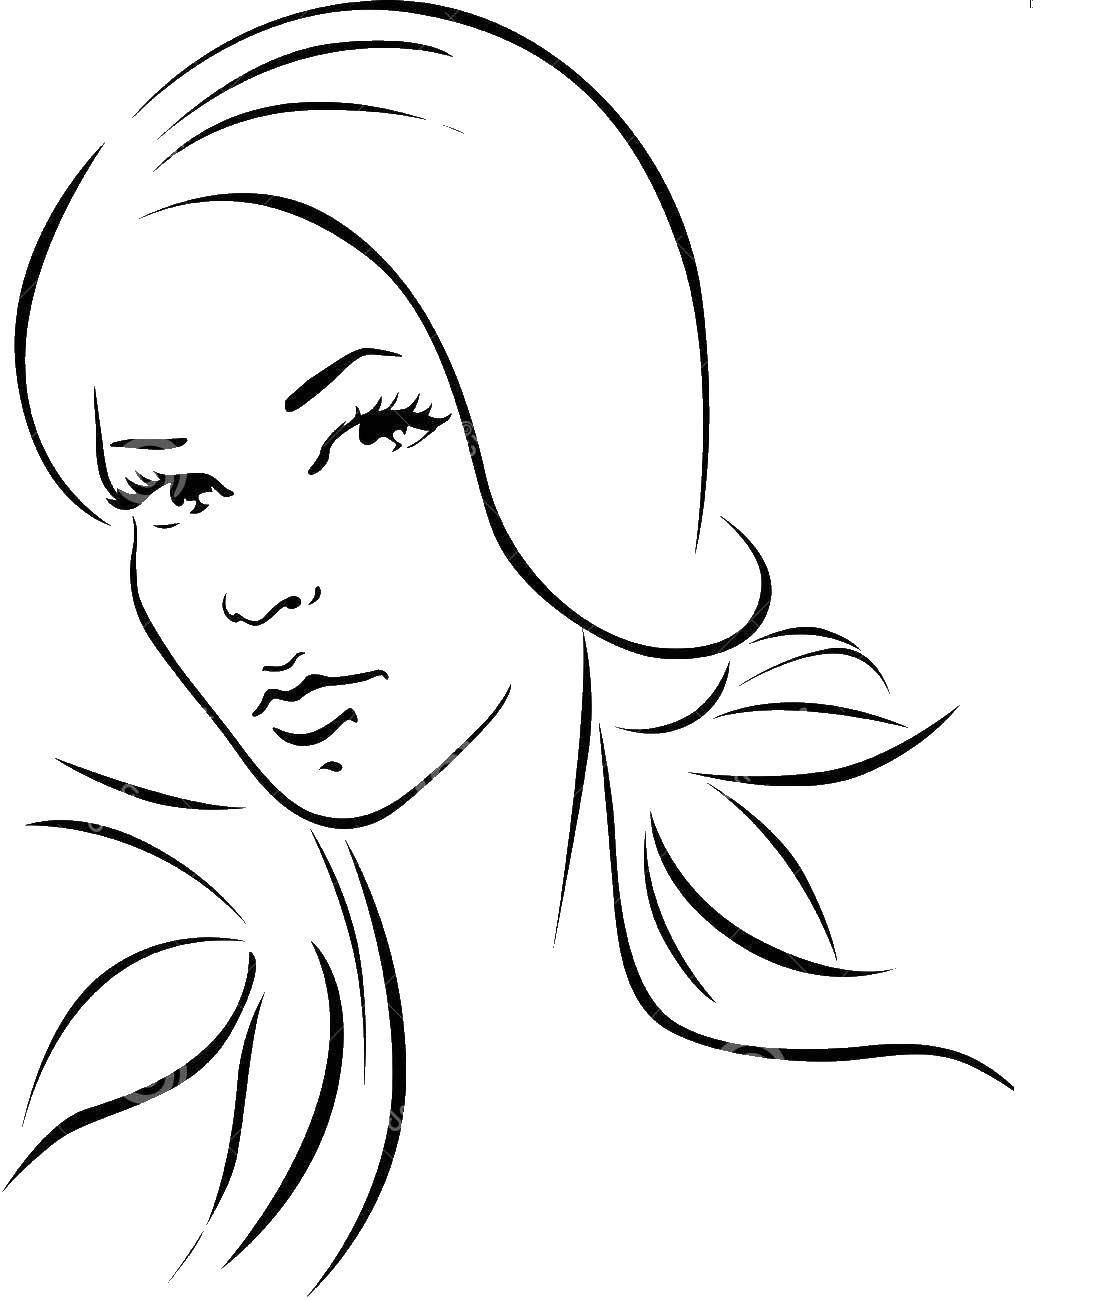 Coloring Girl. Category The contour of girls. Tags:  girl.